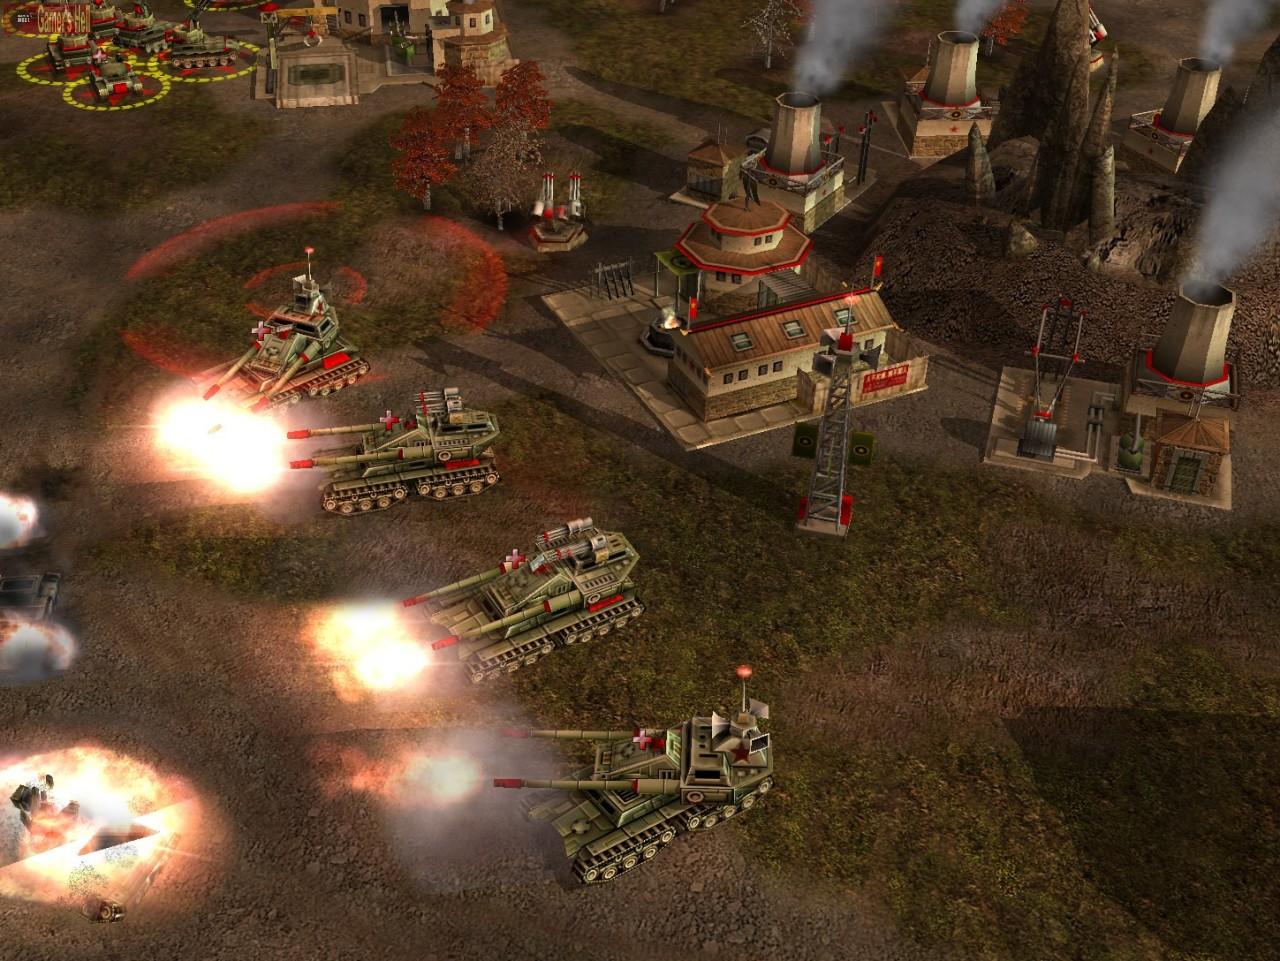 command and conquer generals download pc